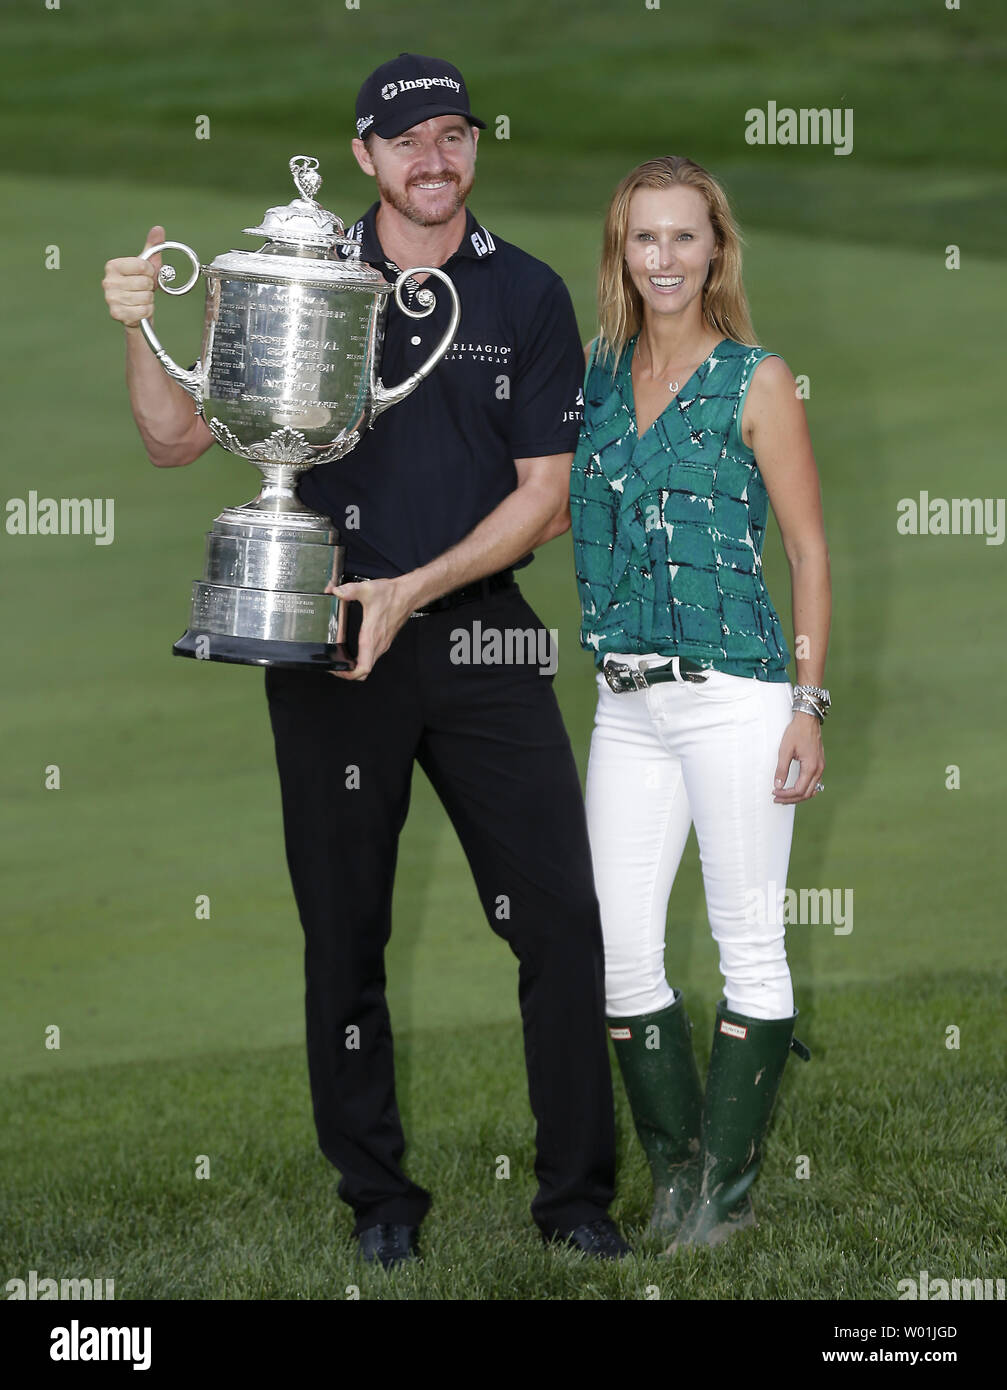 Veel schetsen Ga door Jimmy Walker holds the Wanamaker Trophy standing with his wife Erin after  the final round at the PGA Championship at Baltusrol Golf Club in  Springfield, New Jersey on July 31, 2016. Walker